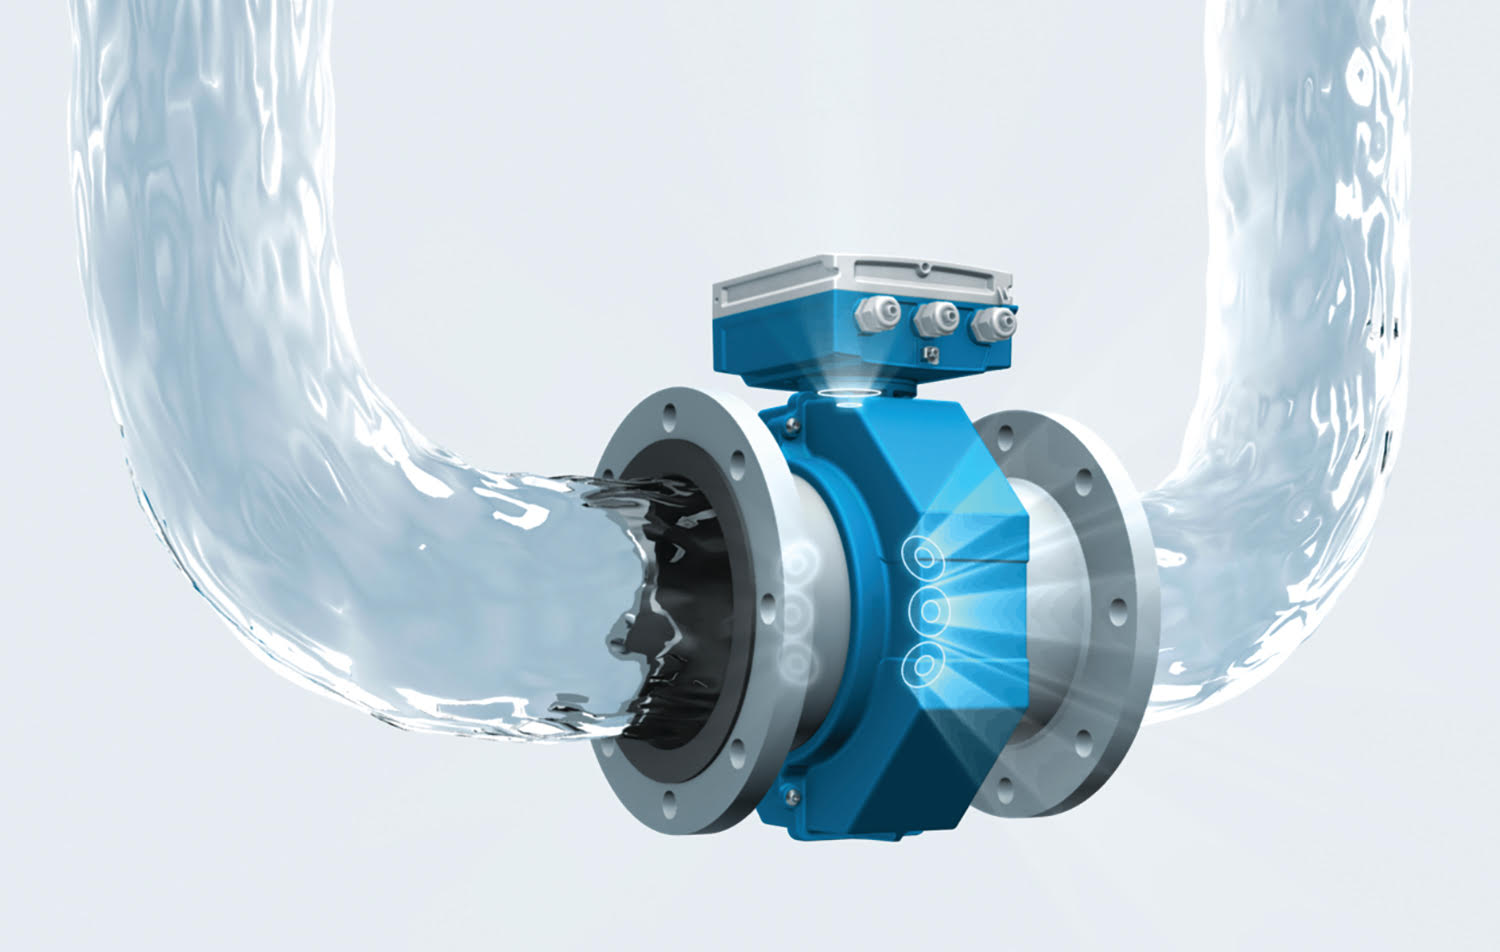 Promag W – The world's first electromagnetic flowmeter for unrestricted measurements